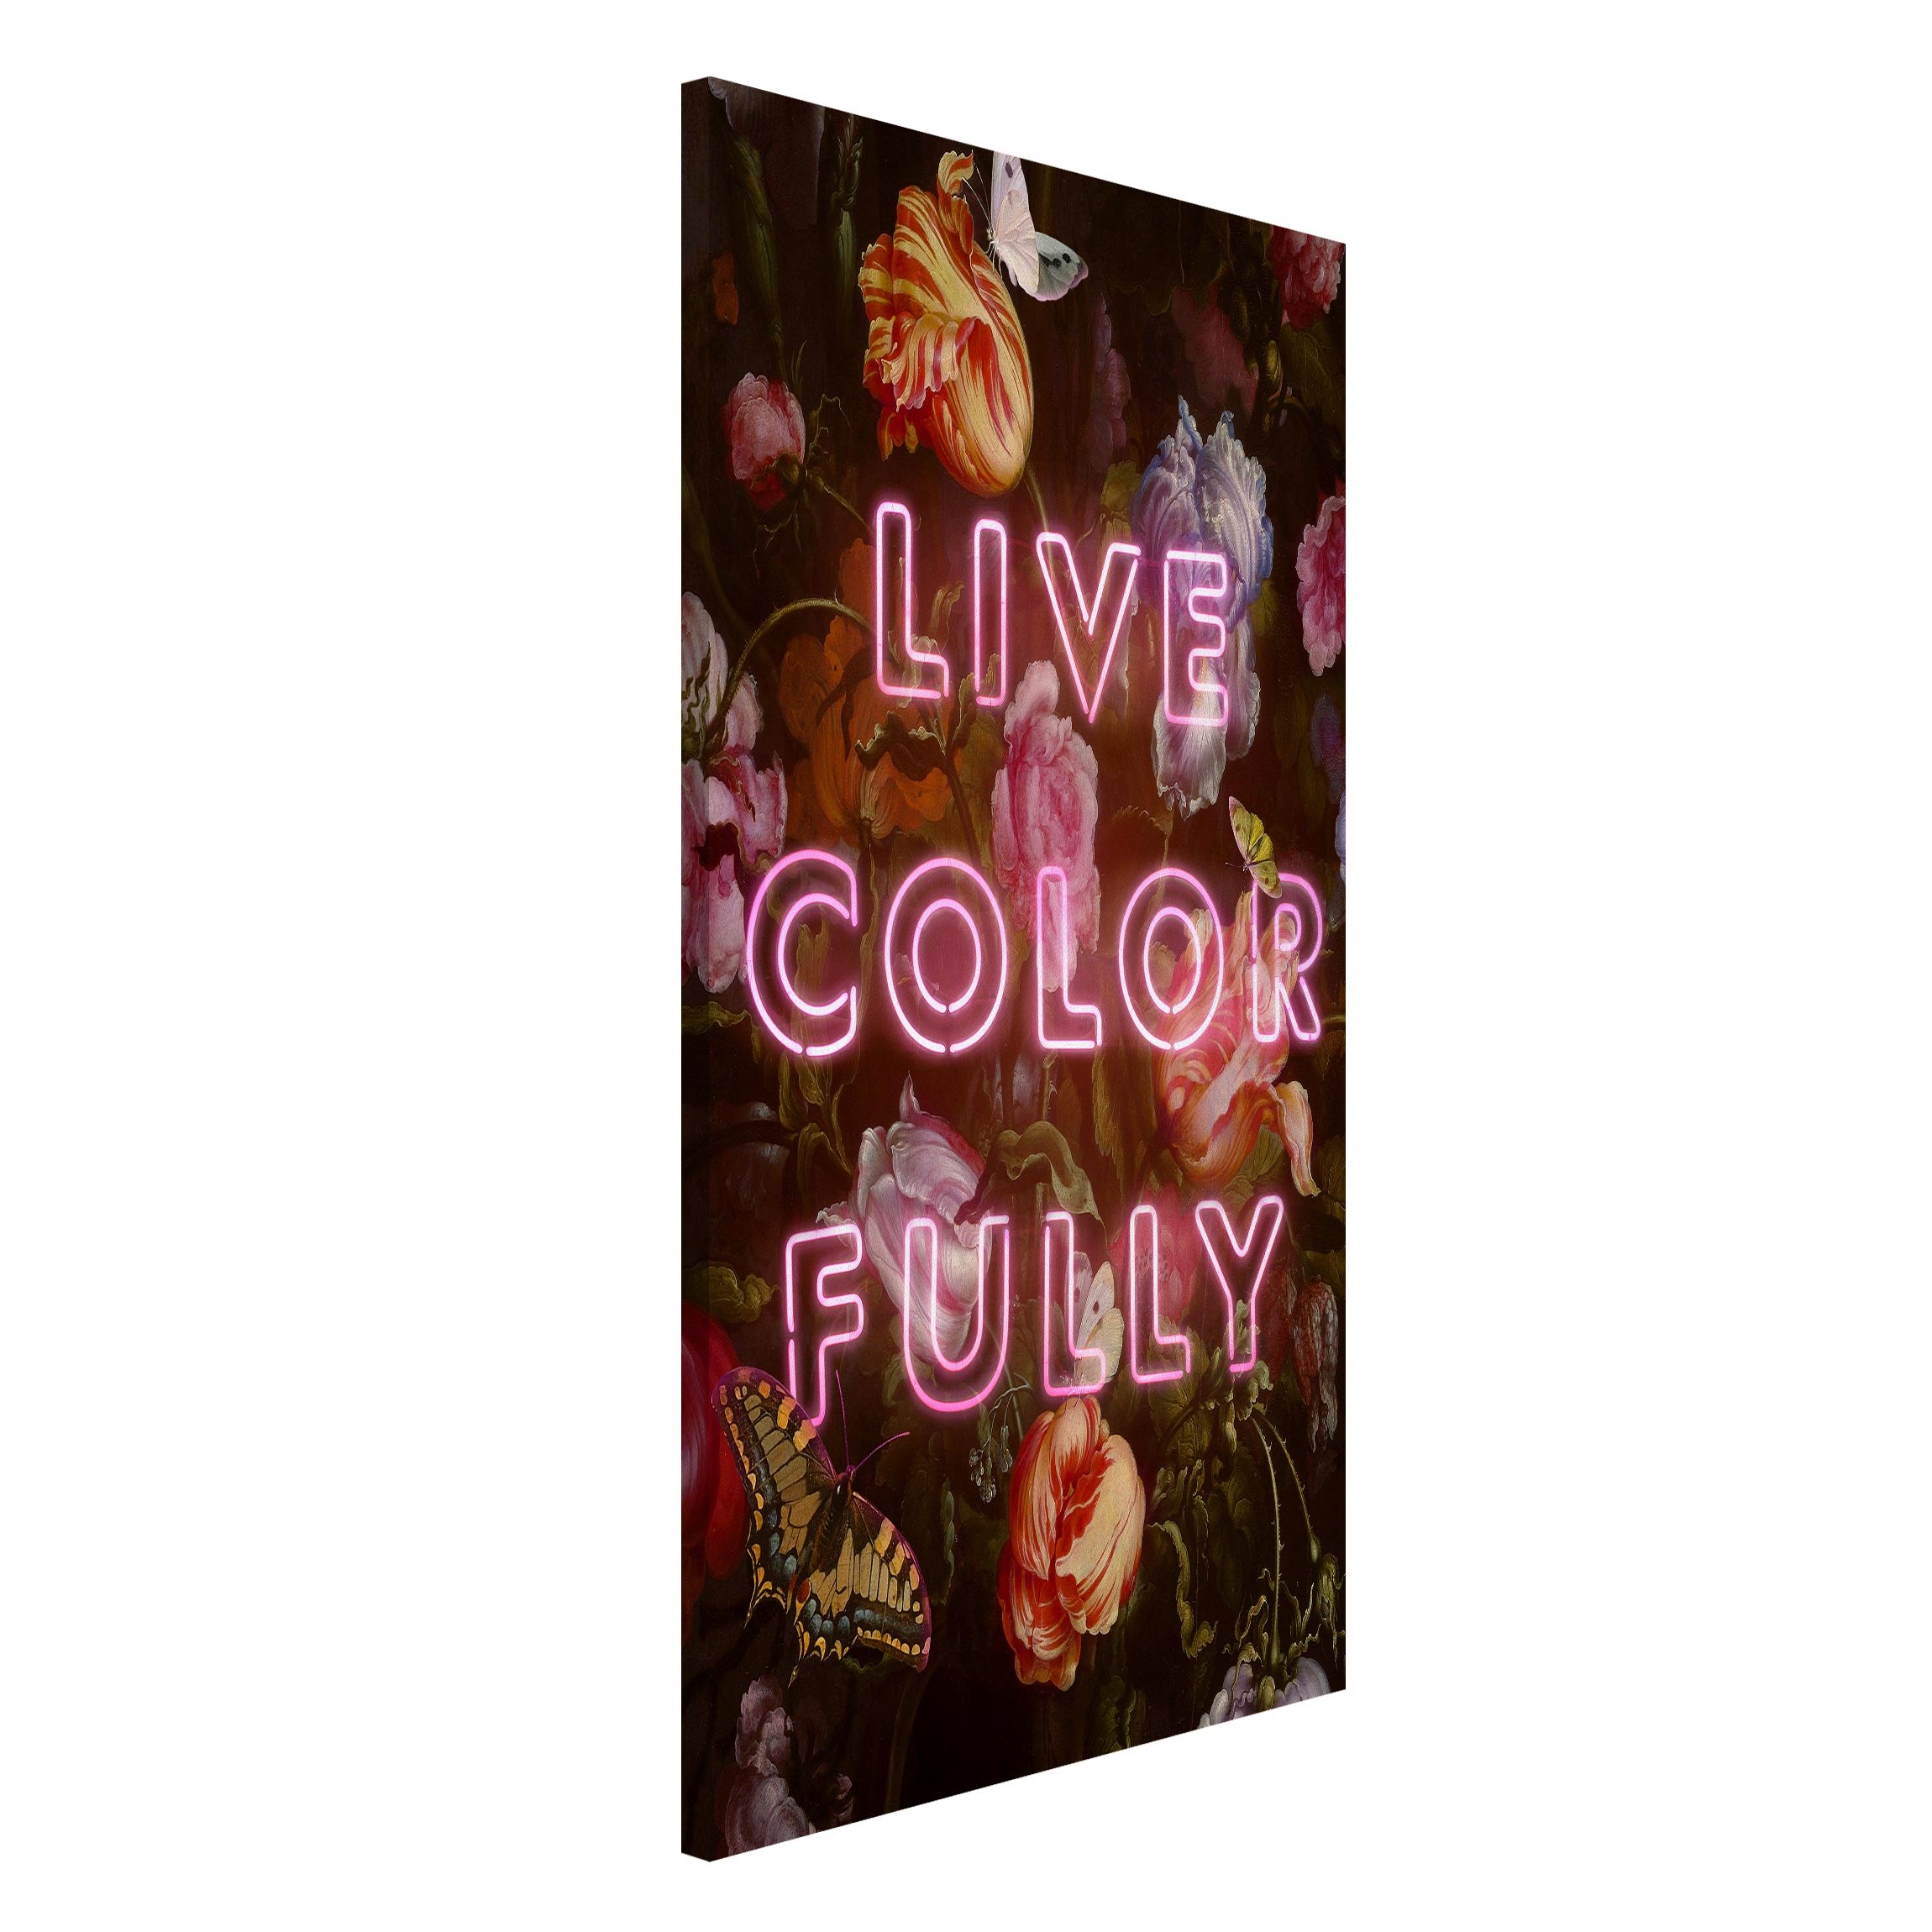  Live Color Fully